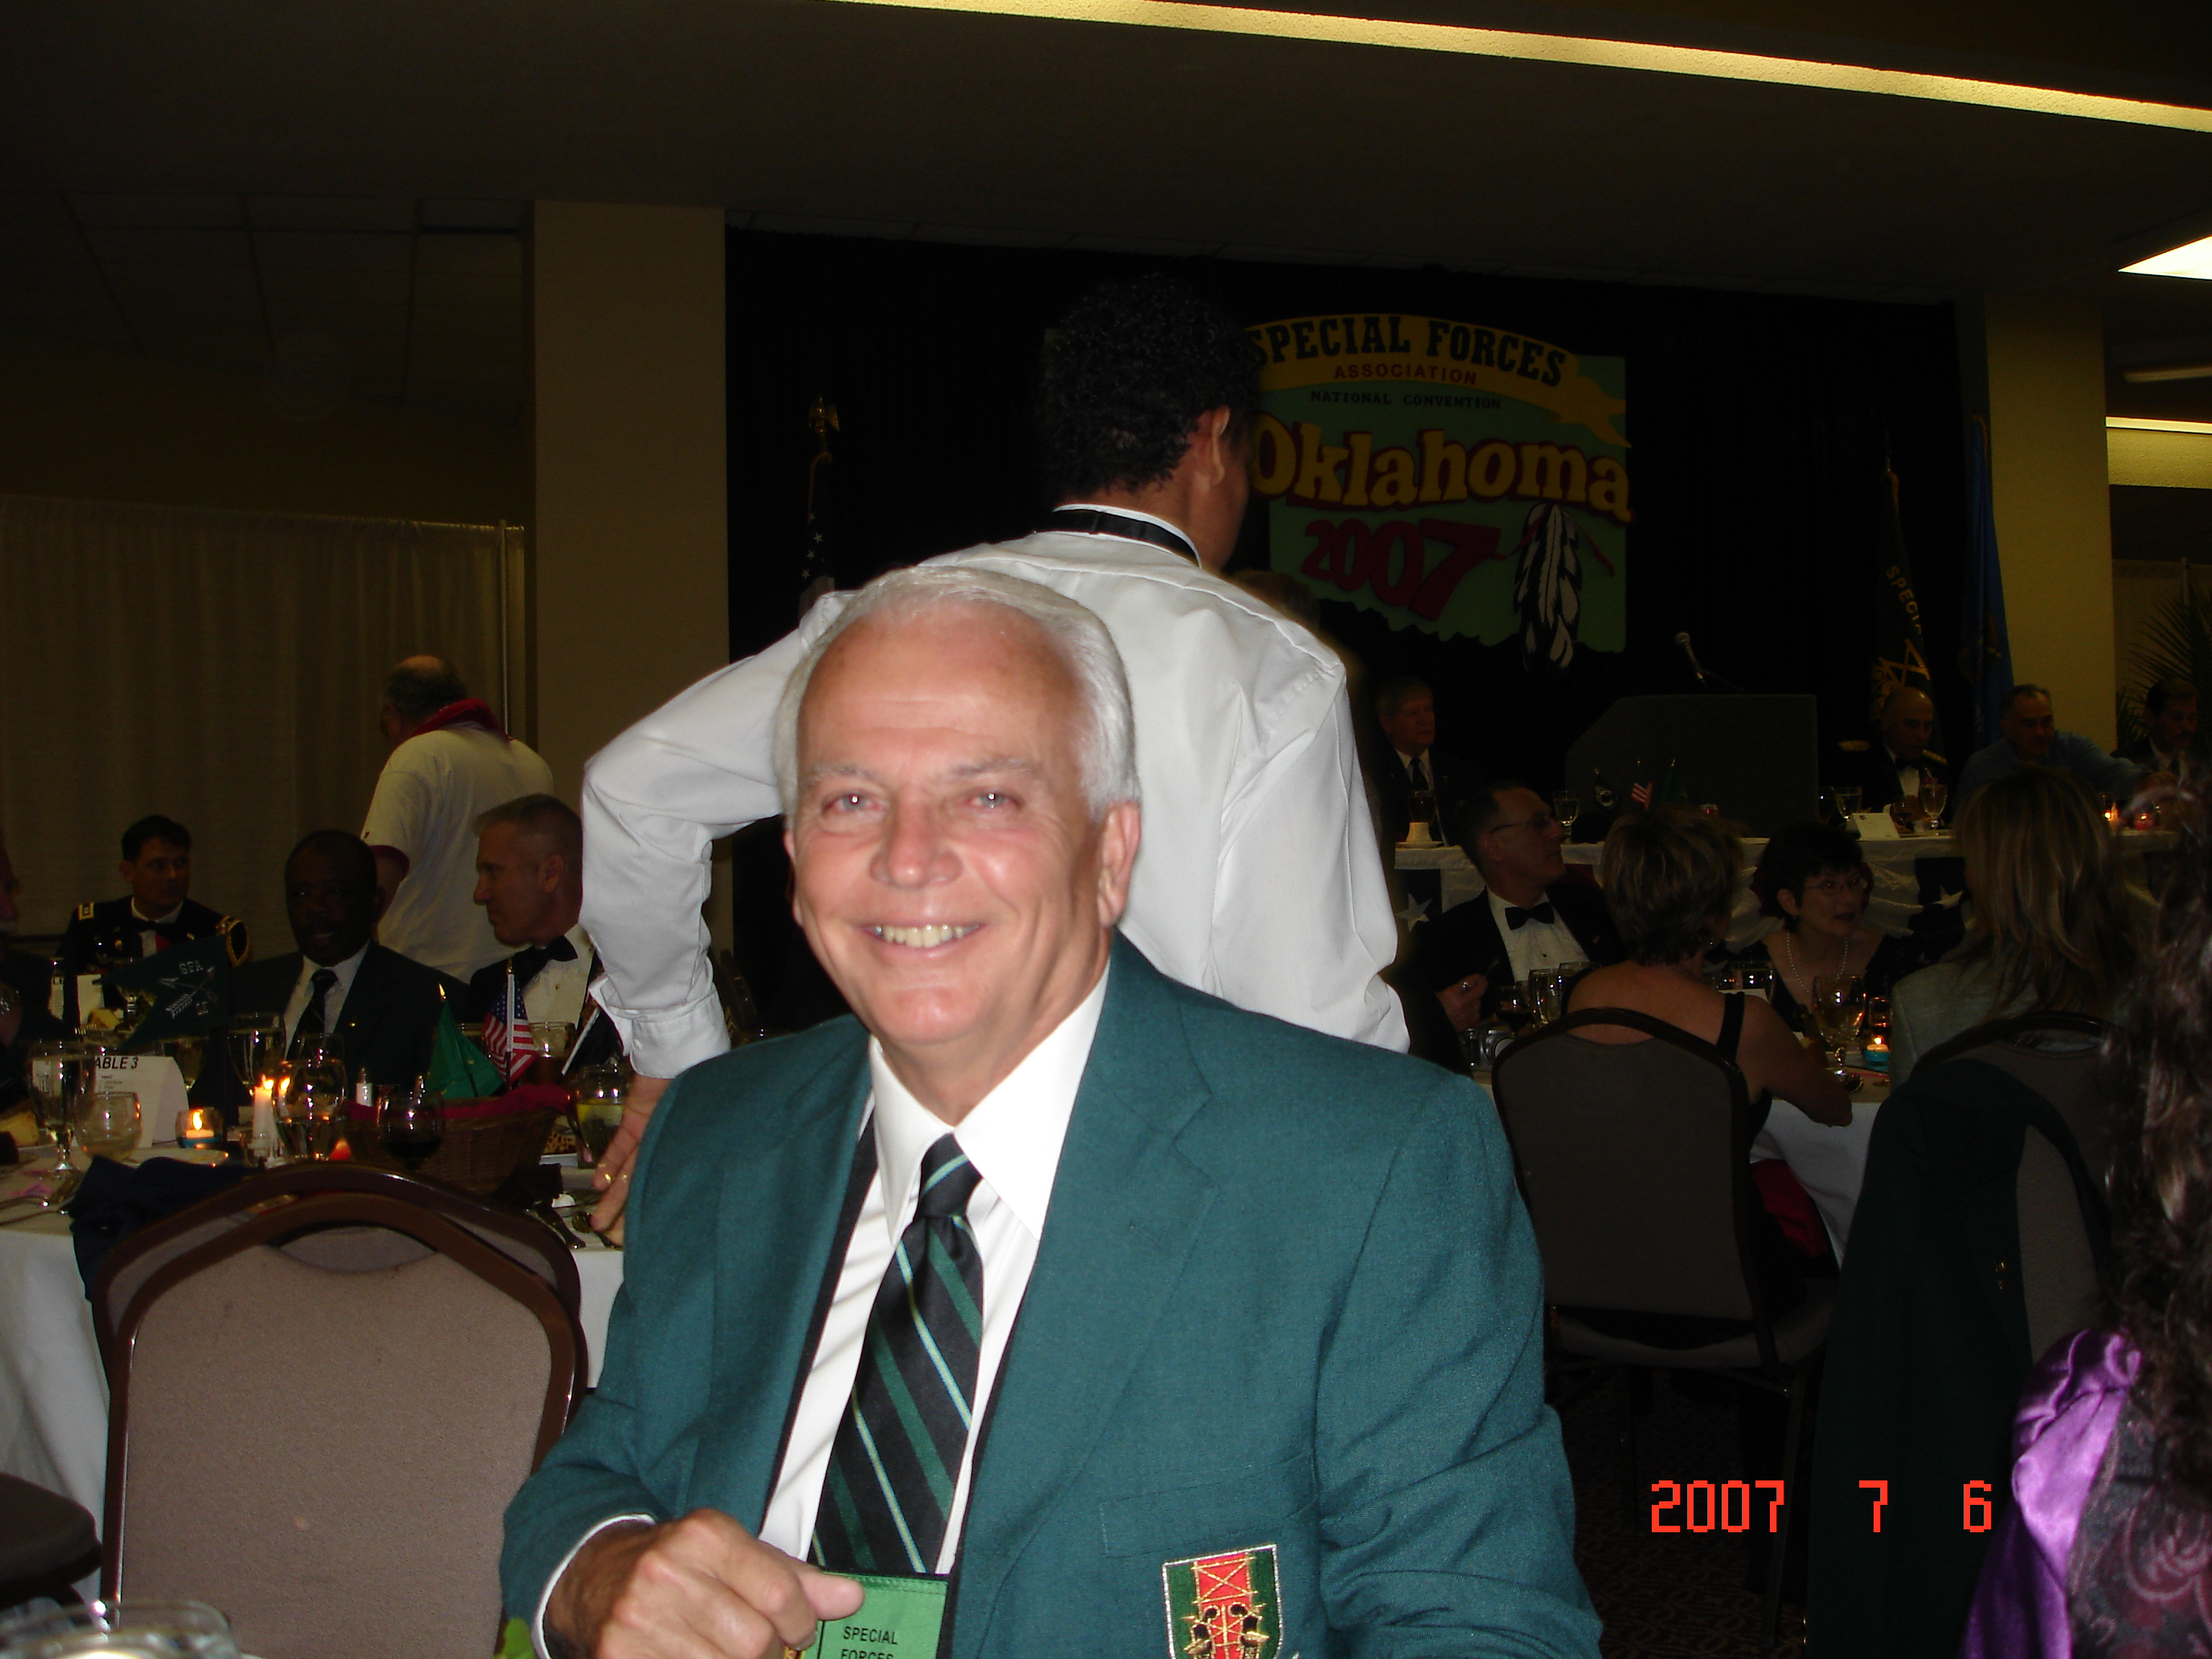 Jerry Cooper at the 2007 Special Forces Convention banquet in Oklahoma City, Oklahoma July 6, 2007.